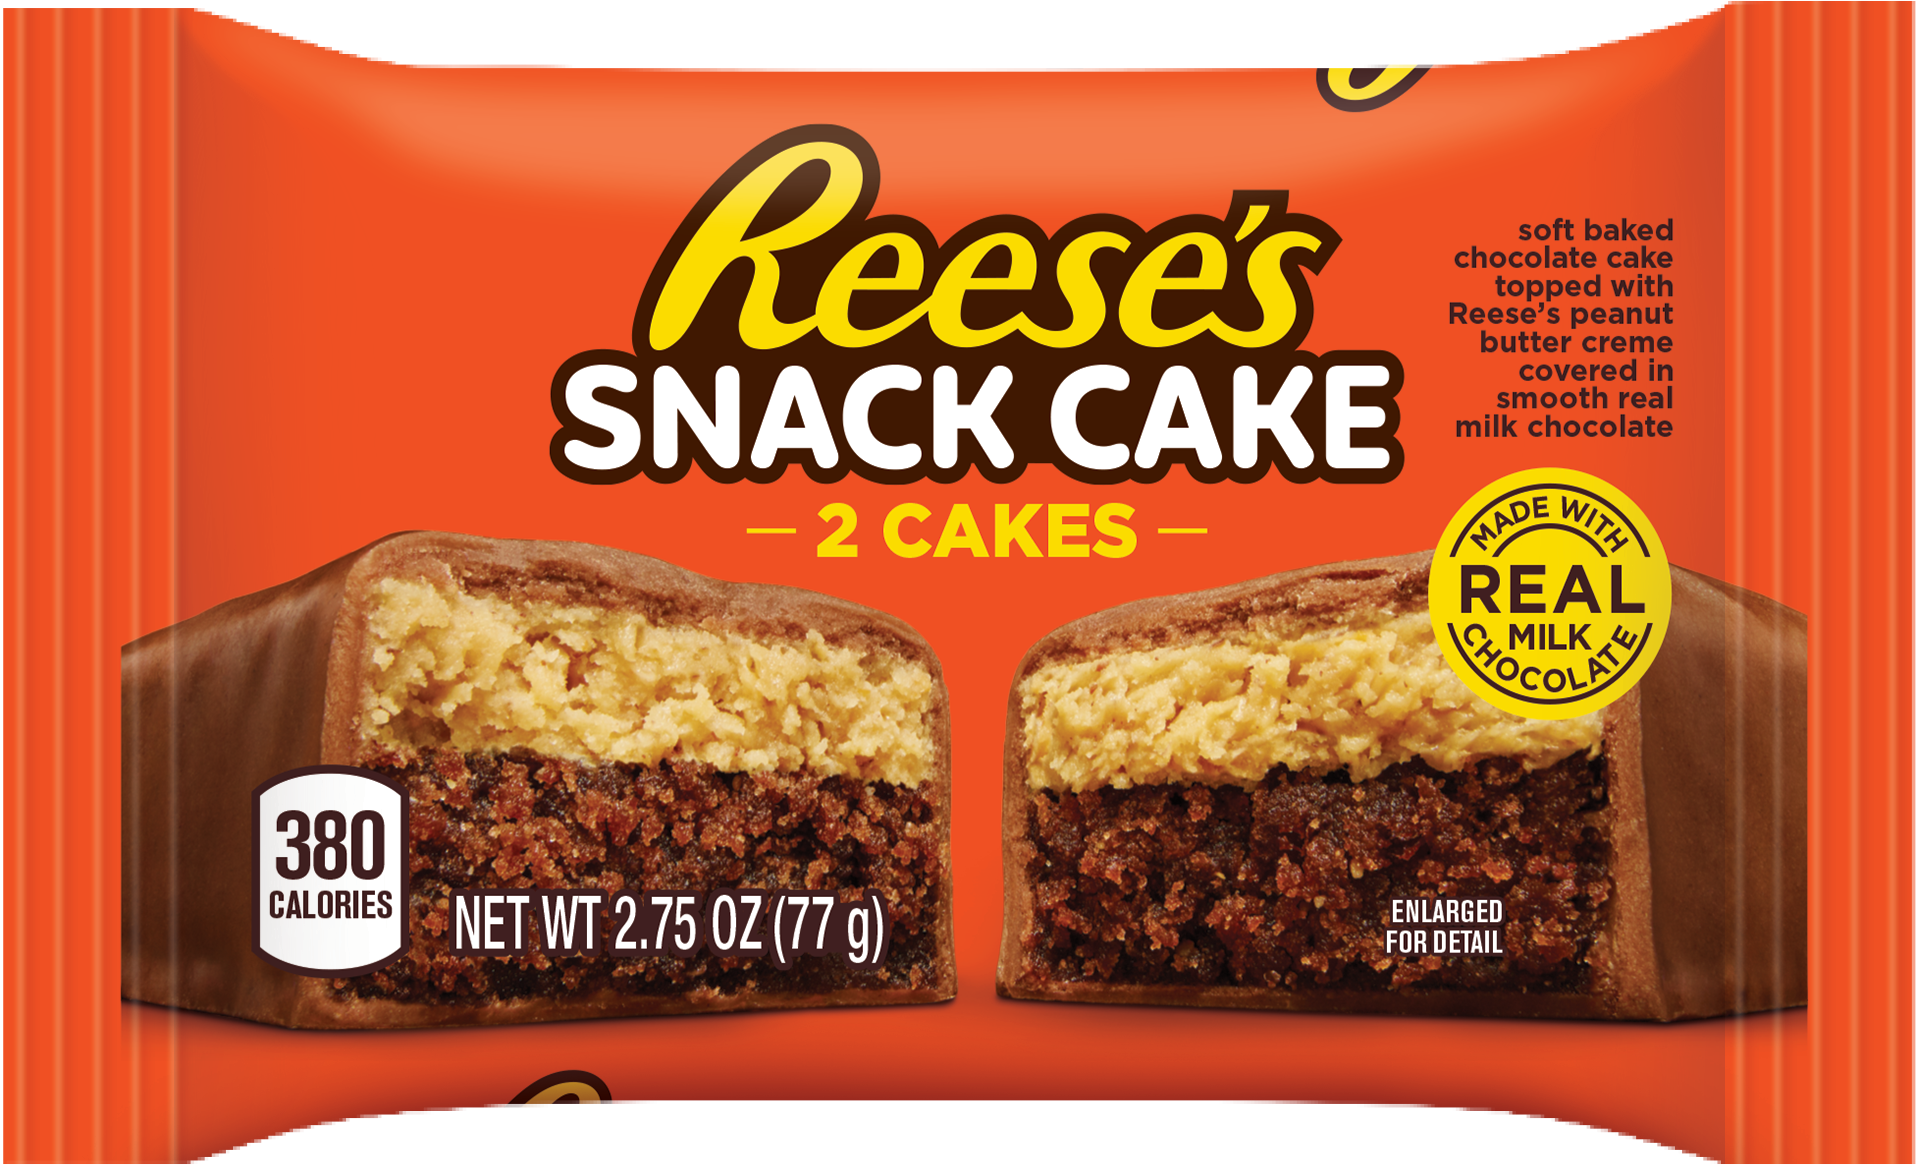 New Reese’s Snack Cake